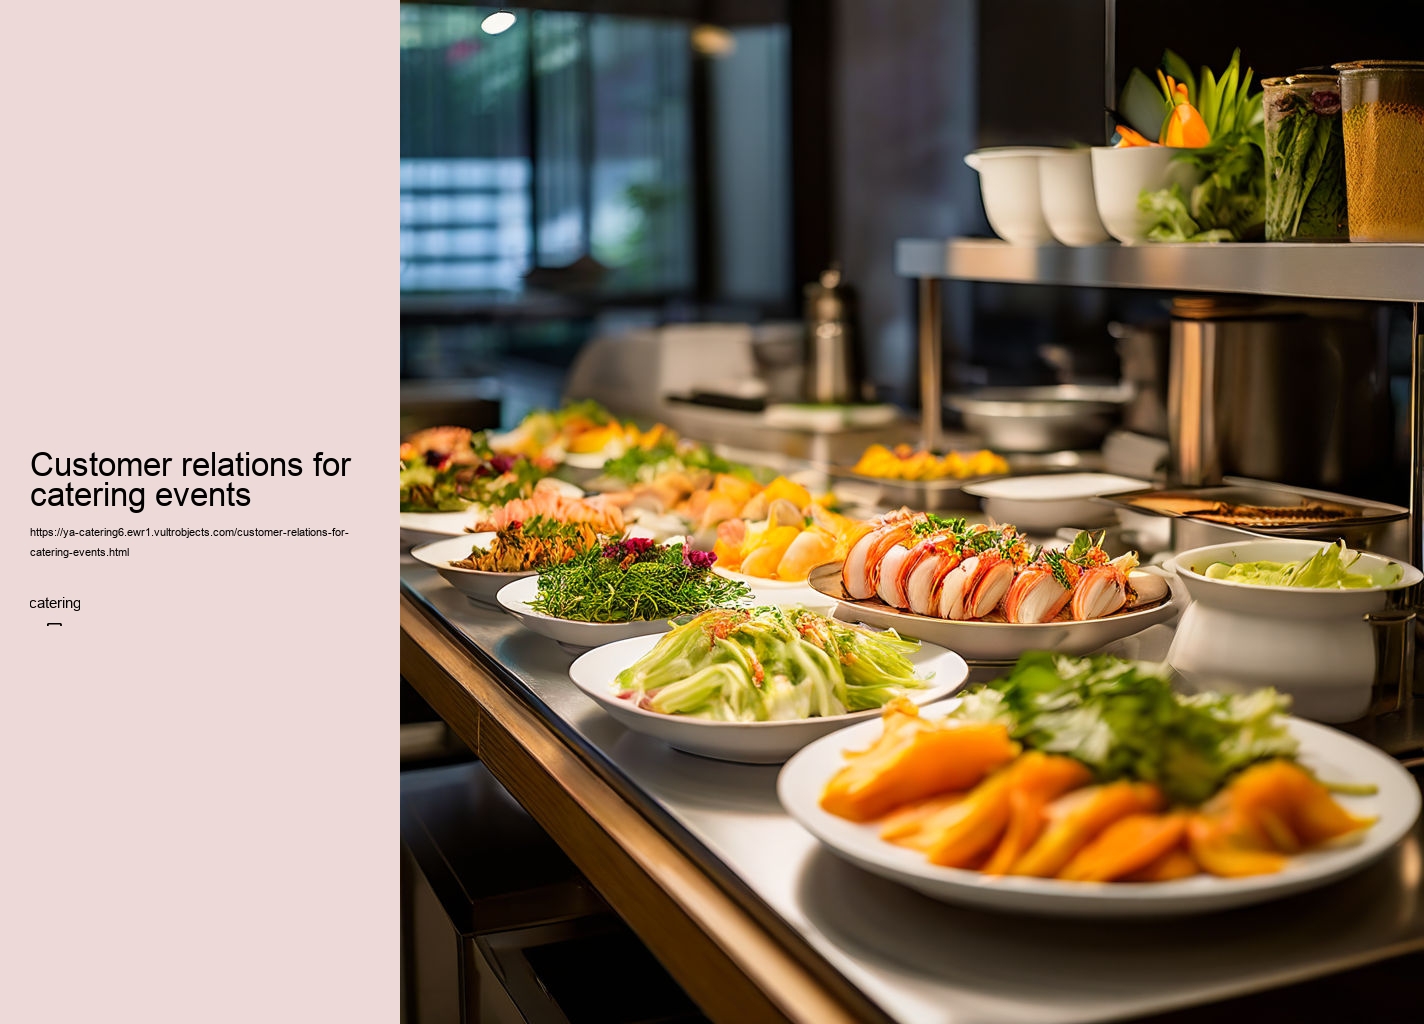 Customer relations for catering events